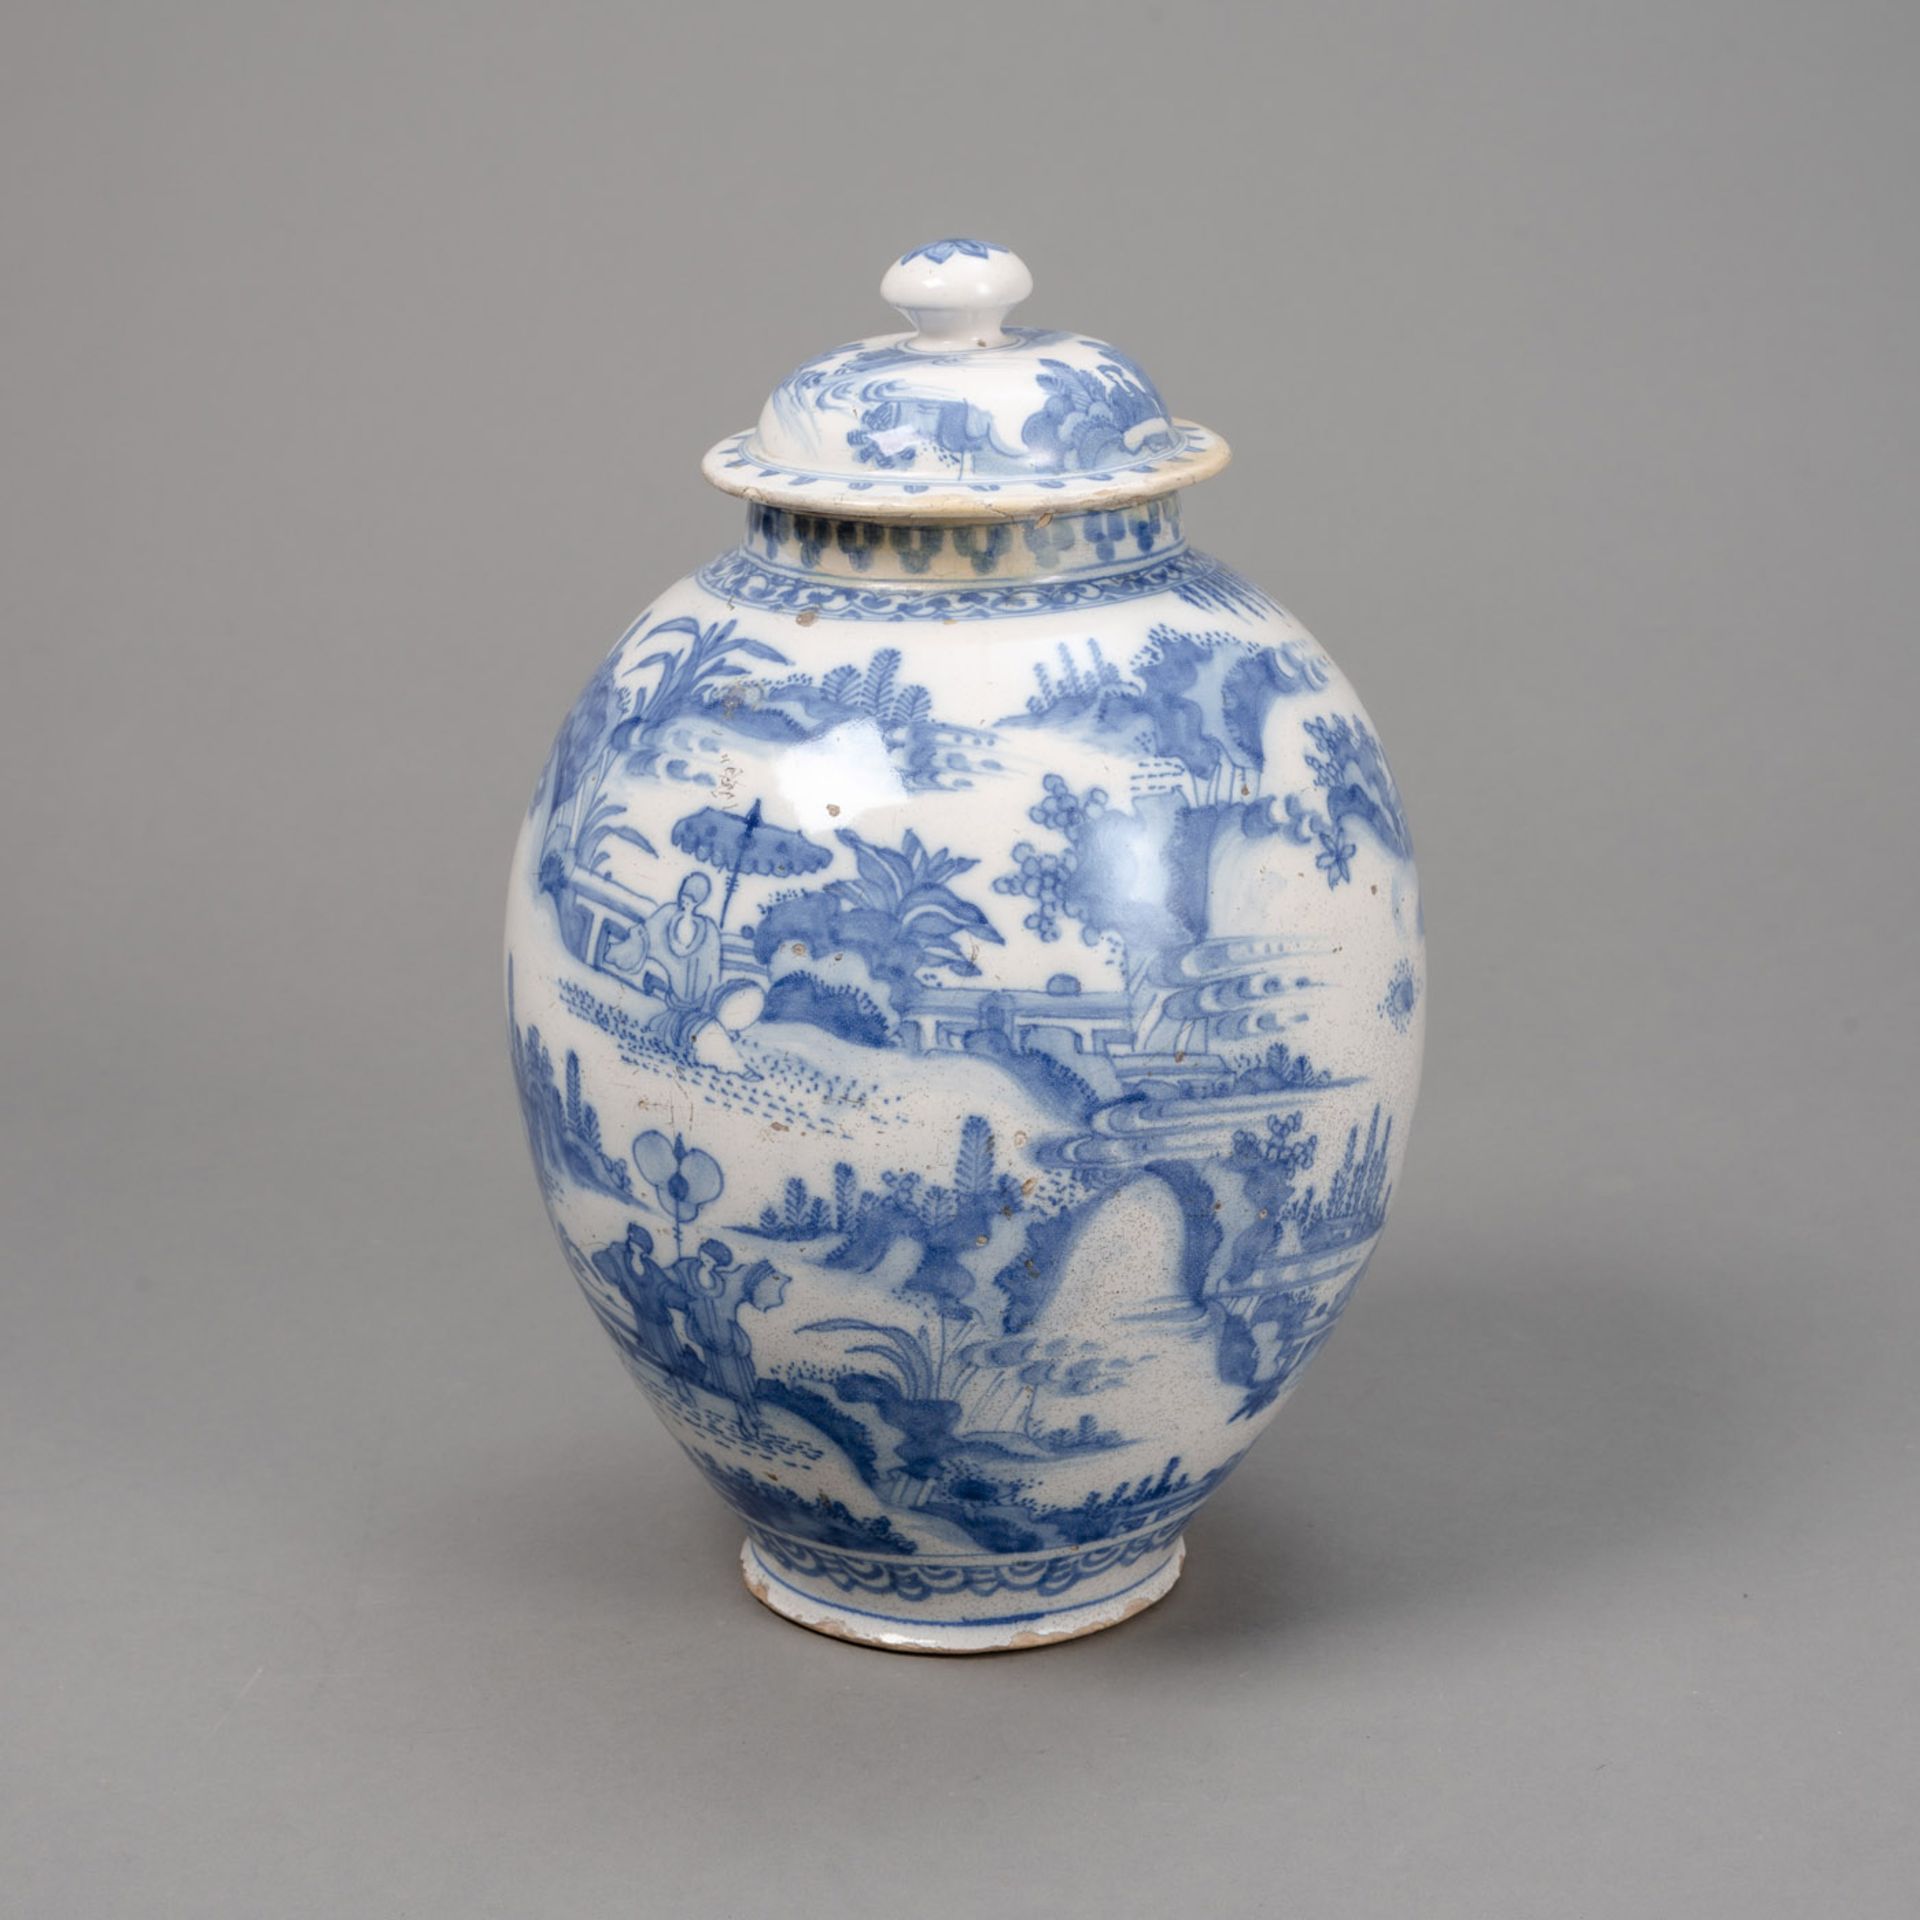 A BLUE AND WHITE LANDSCAPE VASE AND COVER